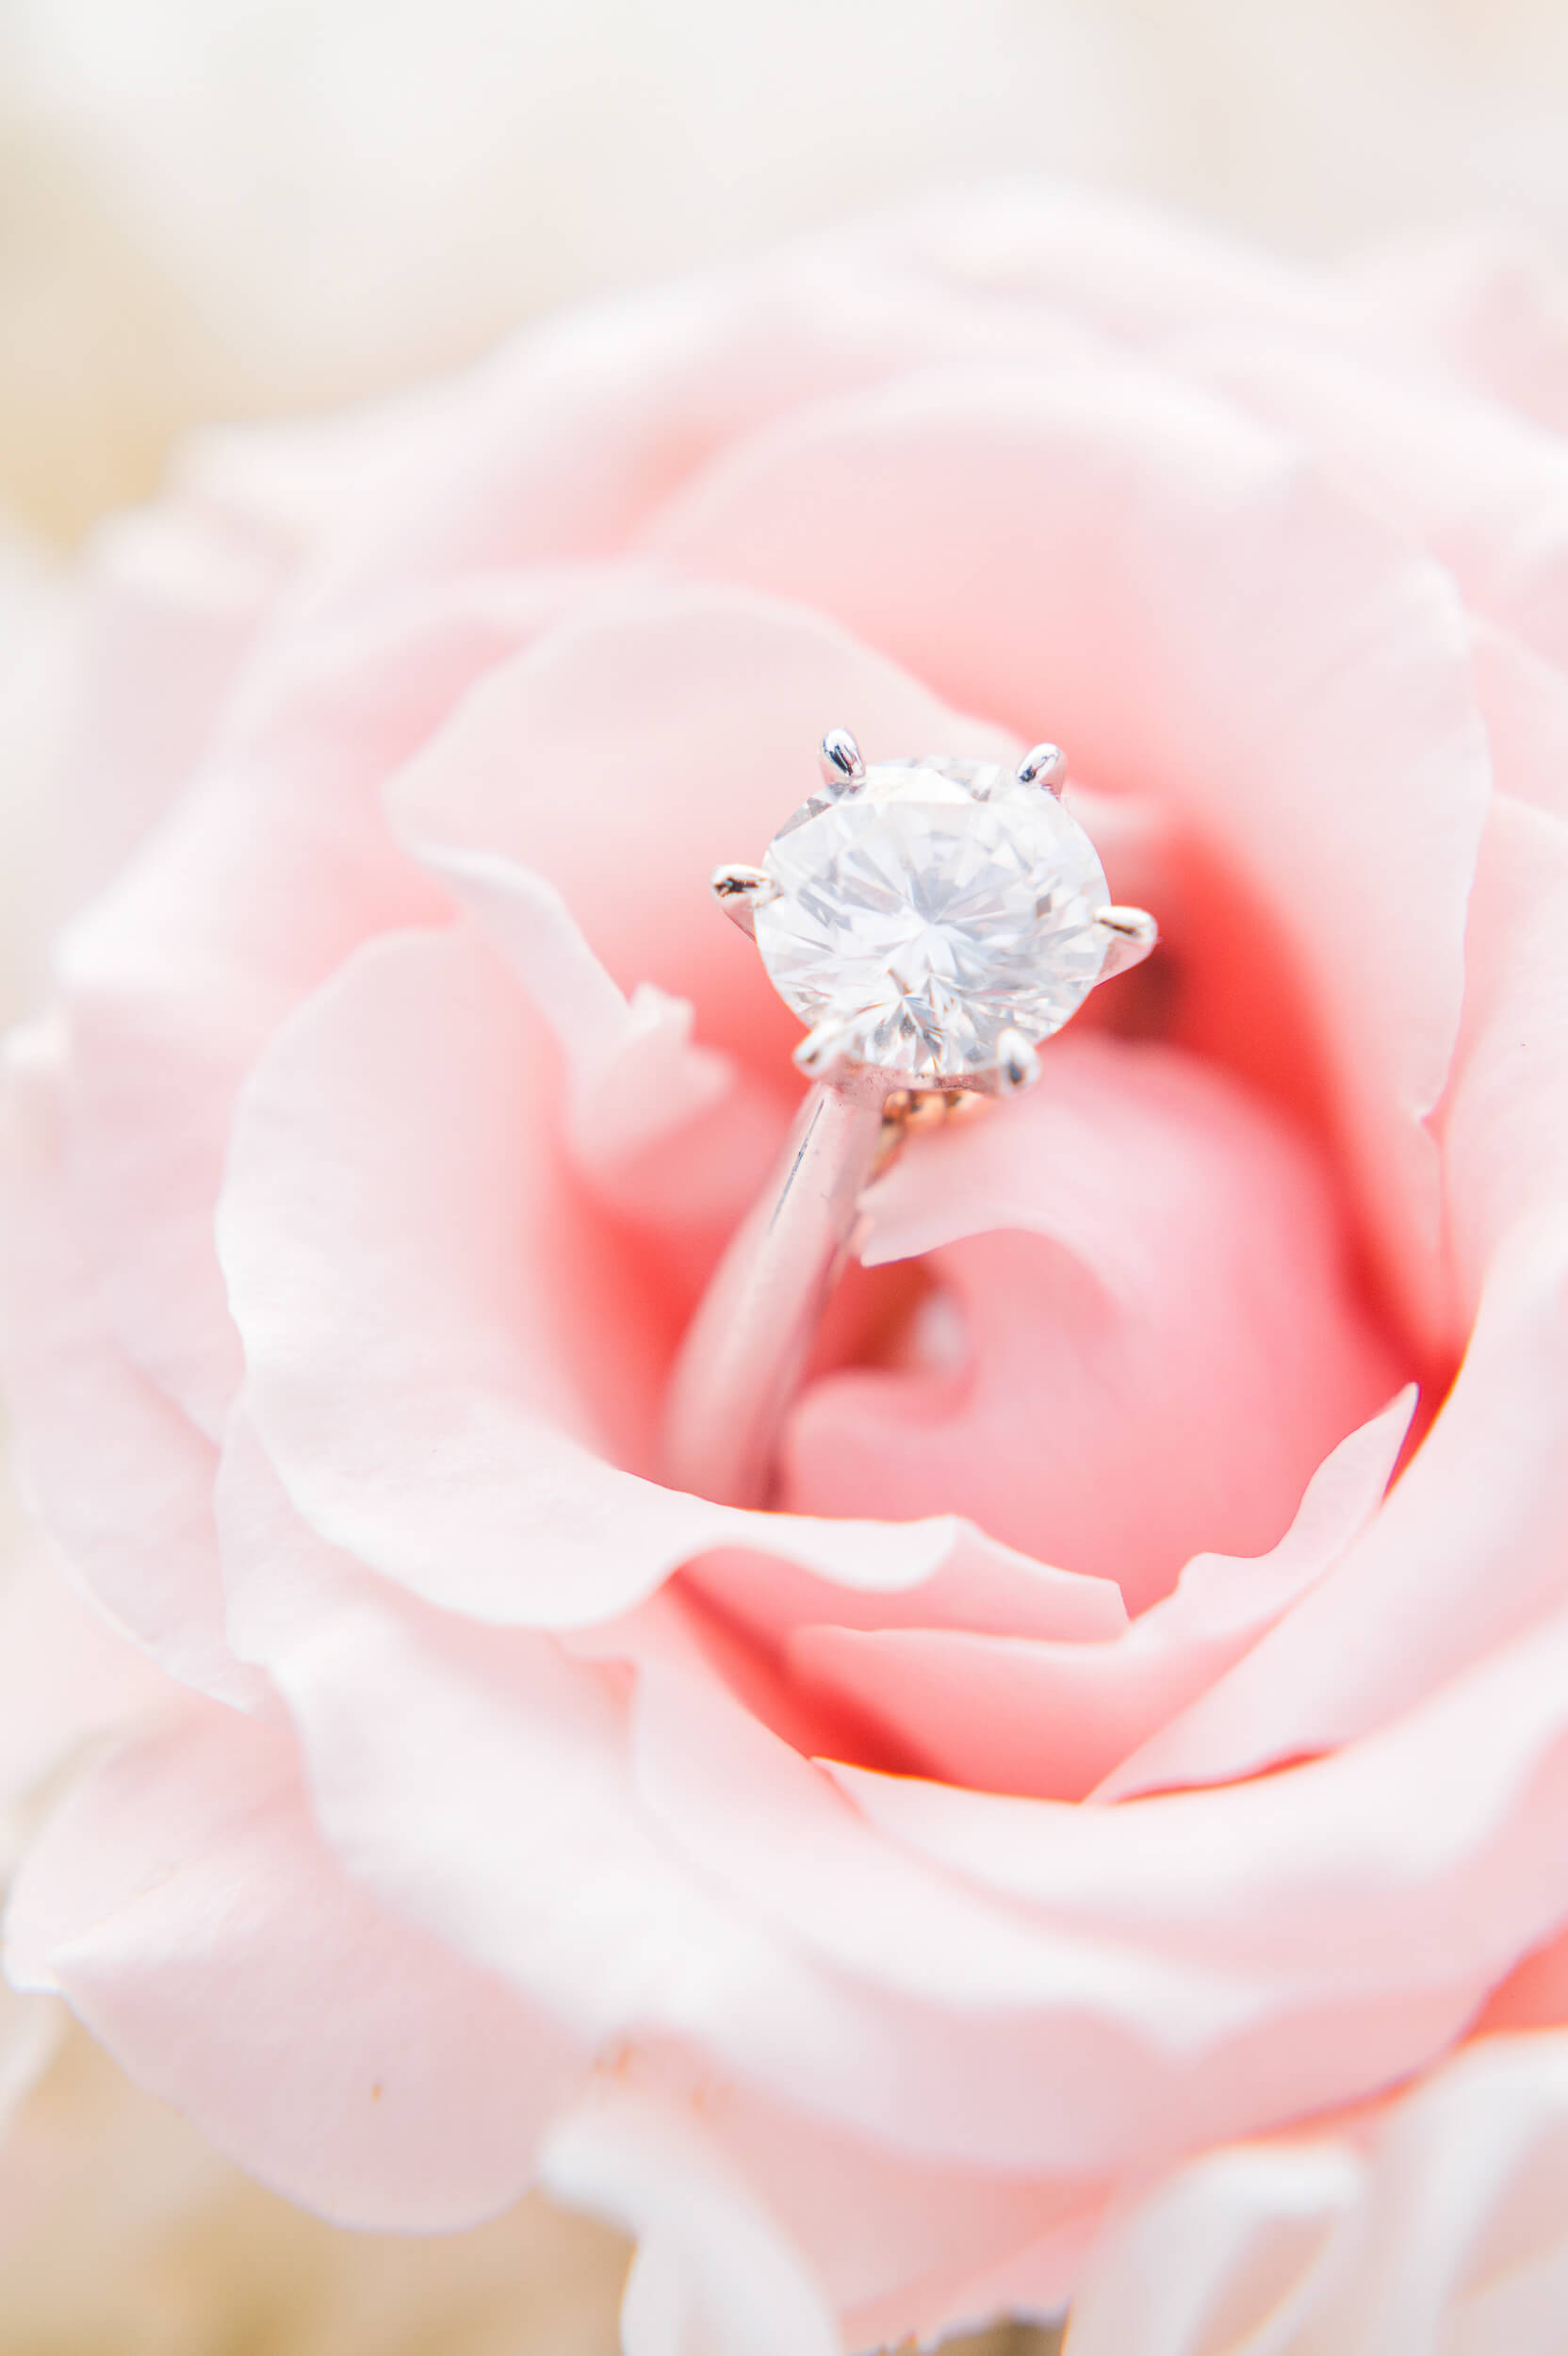 Close up of a white gold diamond engagement ring sitting in a light pink rose.